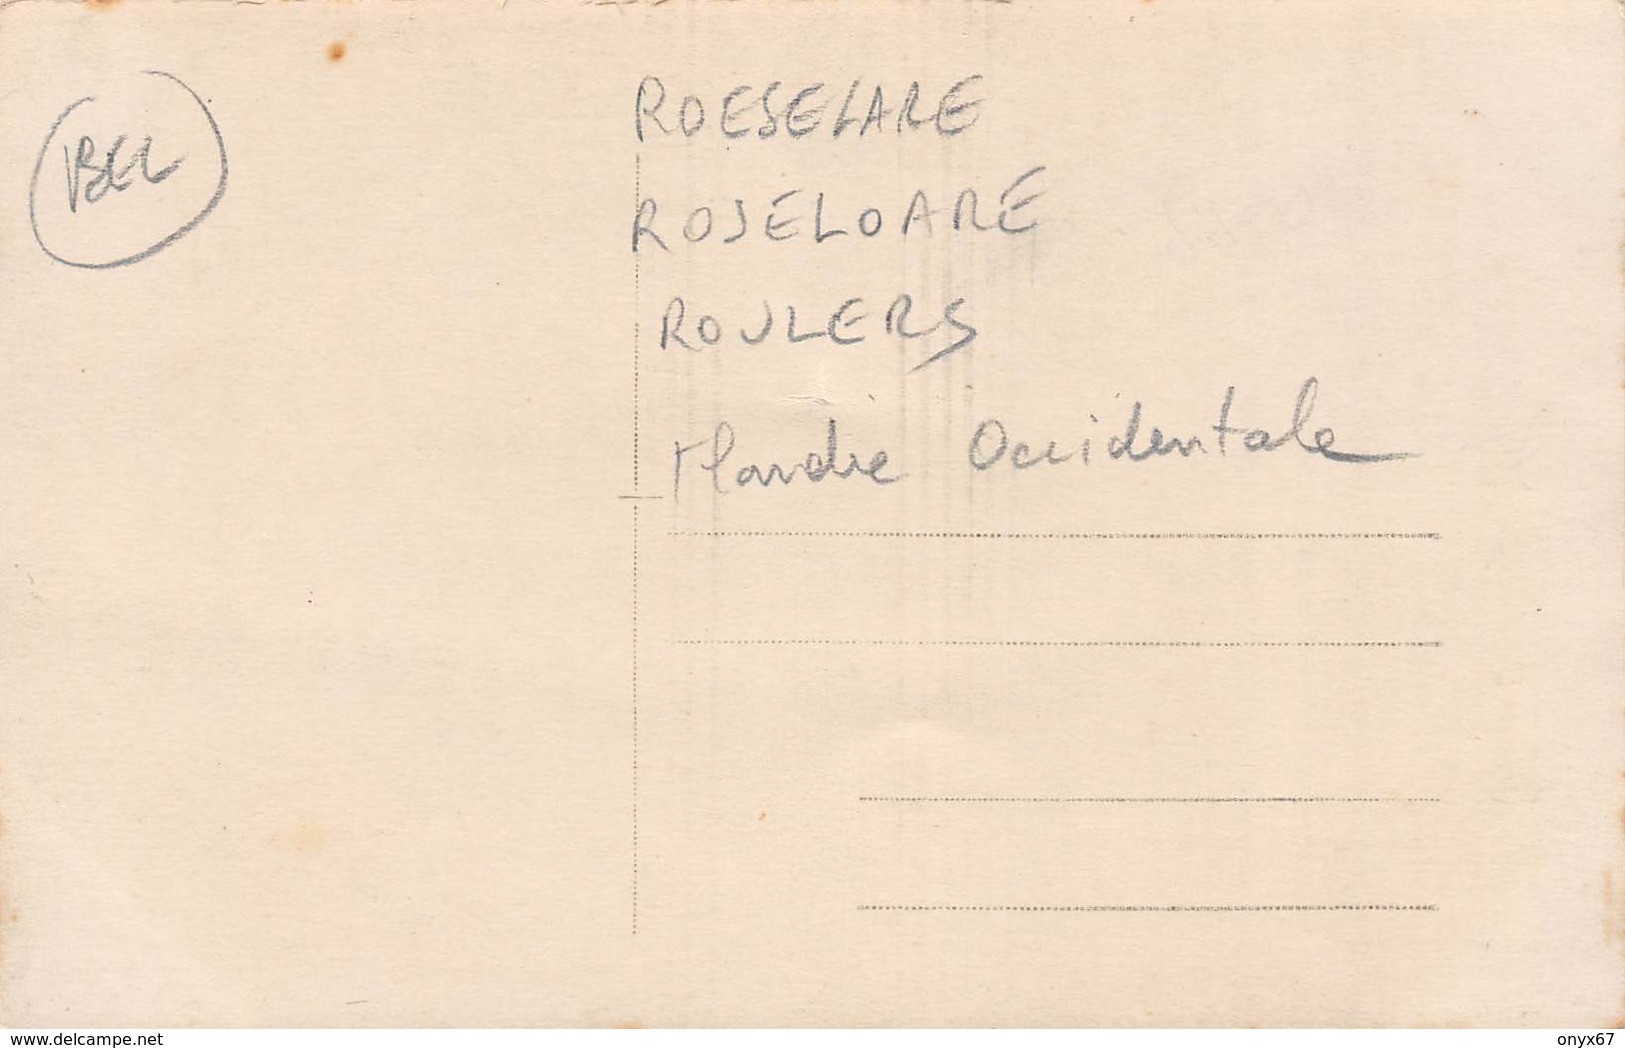 Carte Photo Militaire Allemand ROULERS-ROESELARE-ROSELOARE-Belgique-Flandre Occidentale-Flandern-Kirche-Krieg - Roeselare